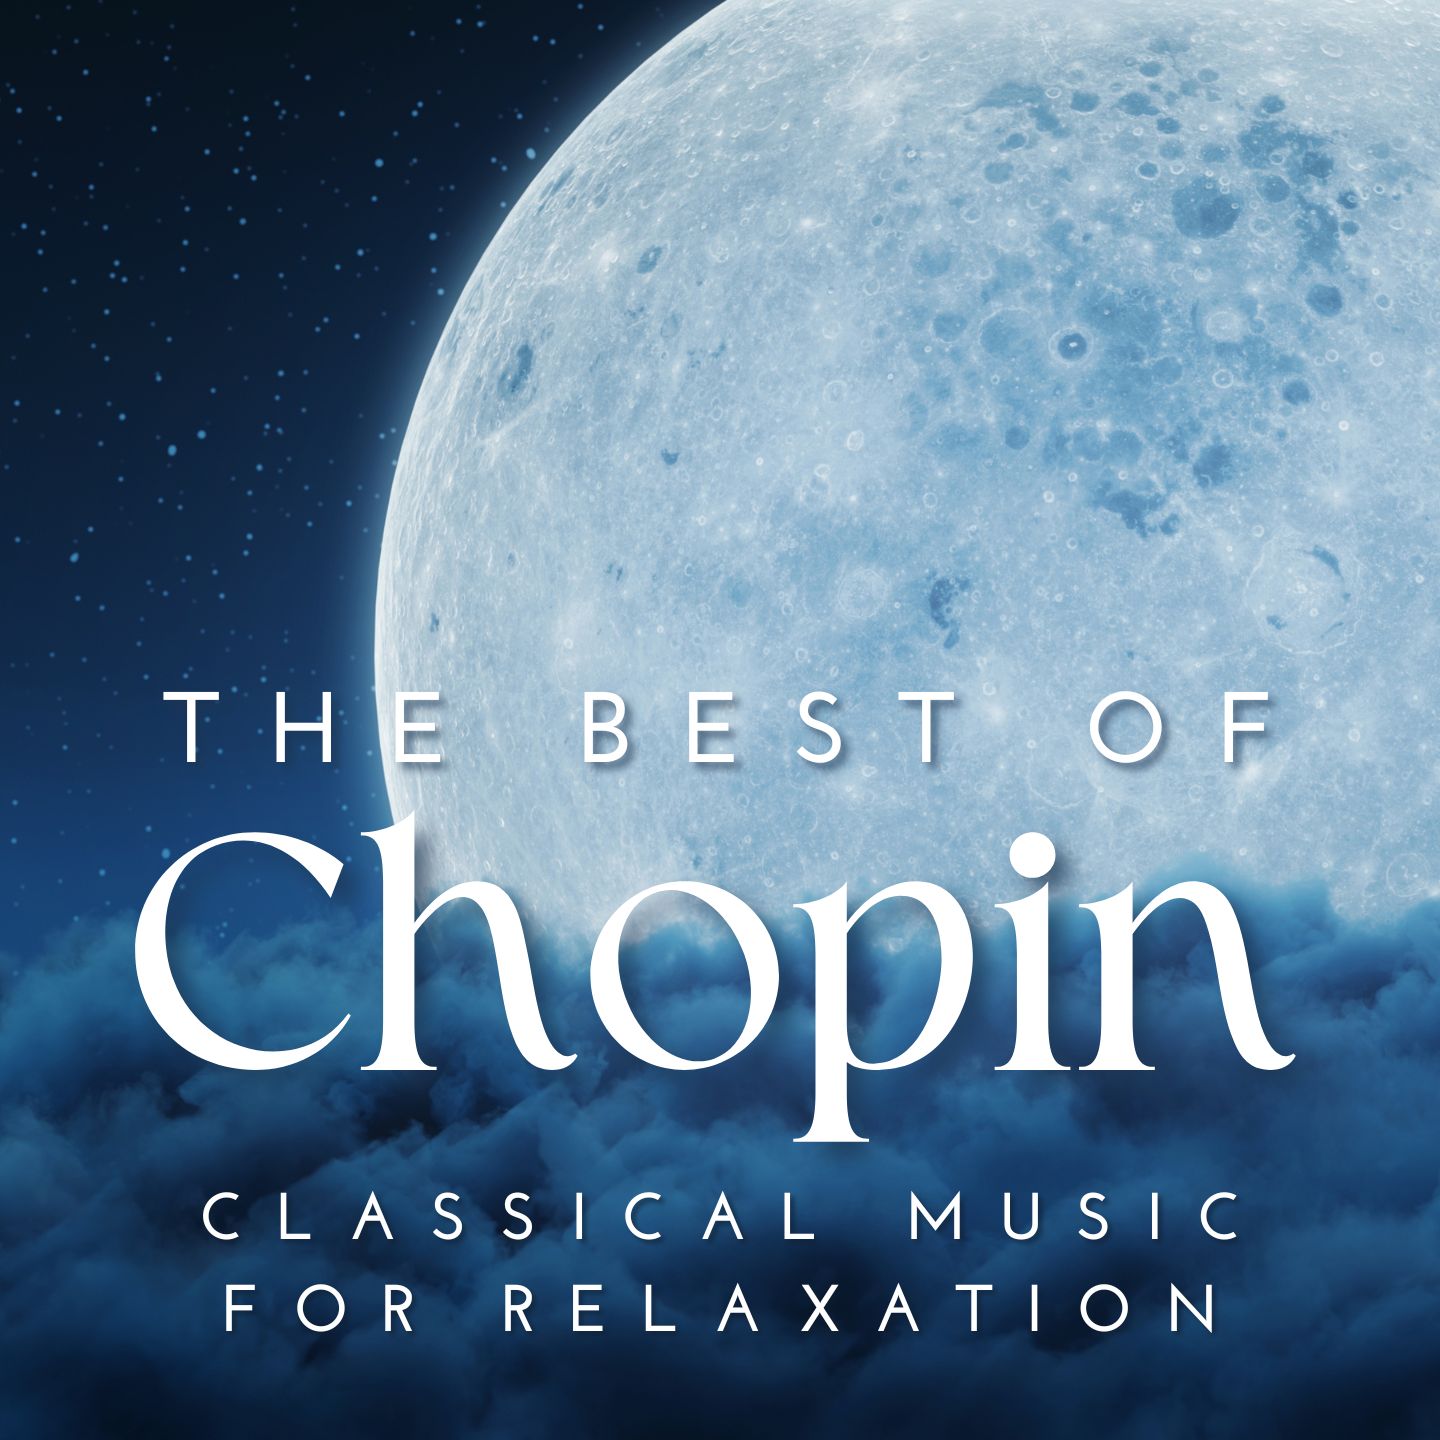 The Best of Chopin : Classical Music for Relaxation